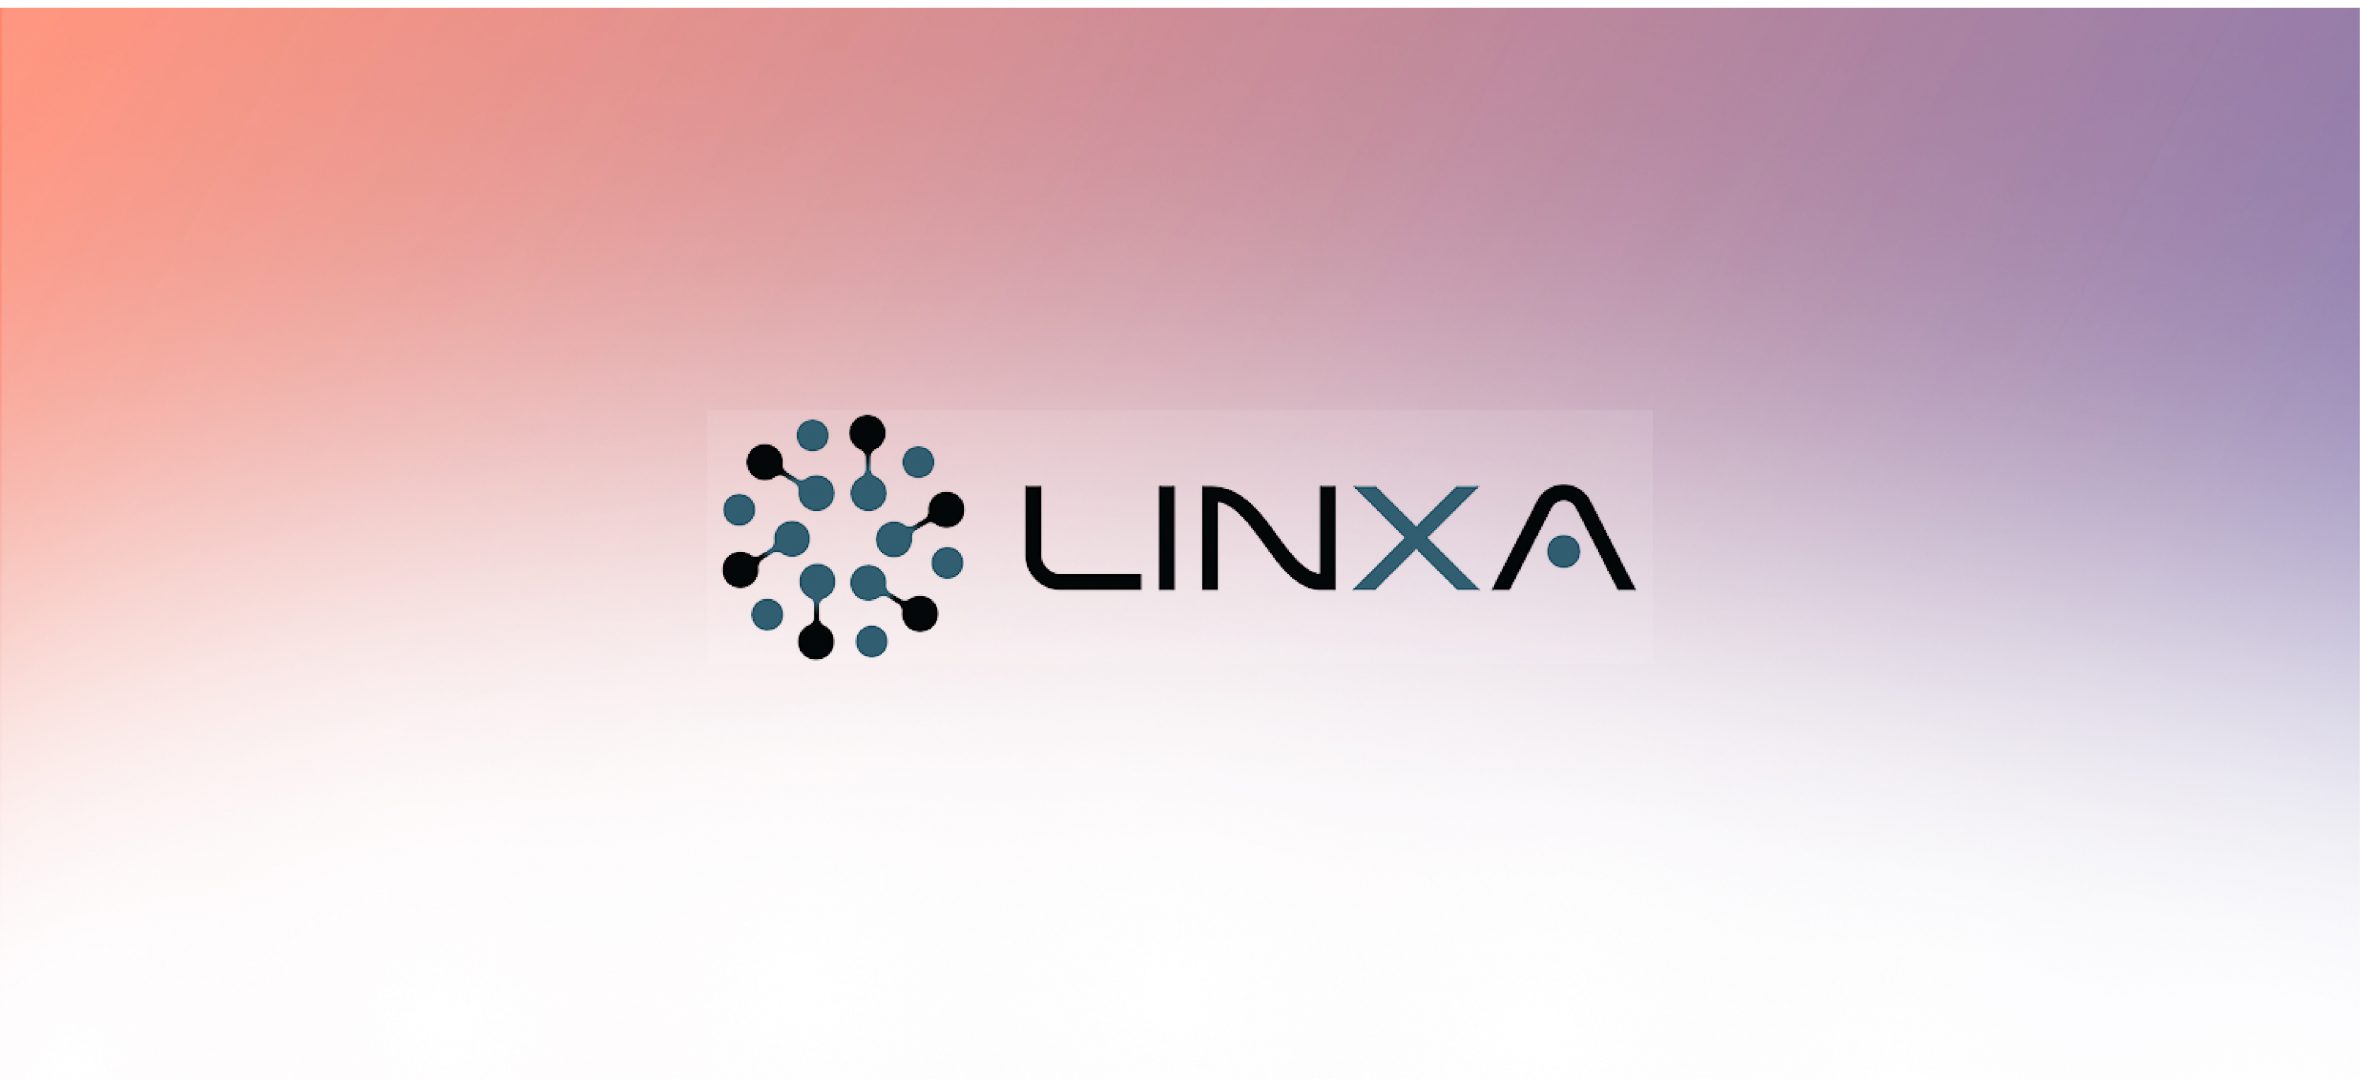 Epsilon selects Linxa to Accelerate Growth of Its Intelligent Voice Solutions